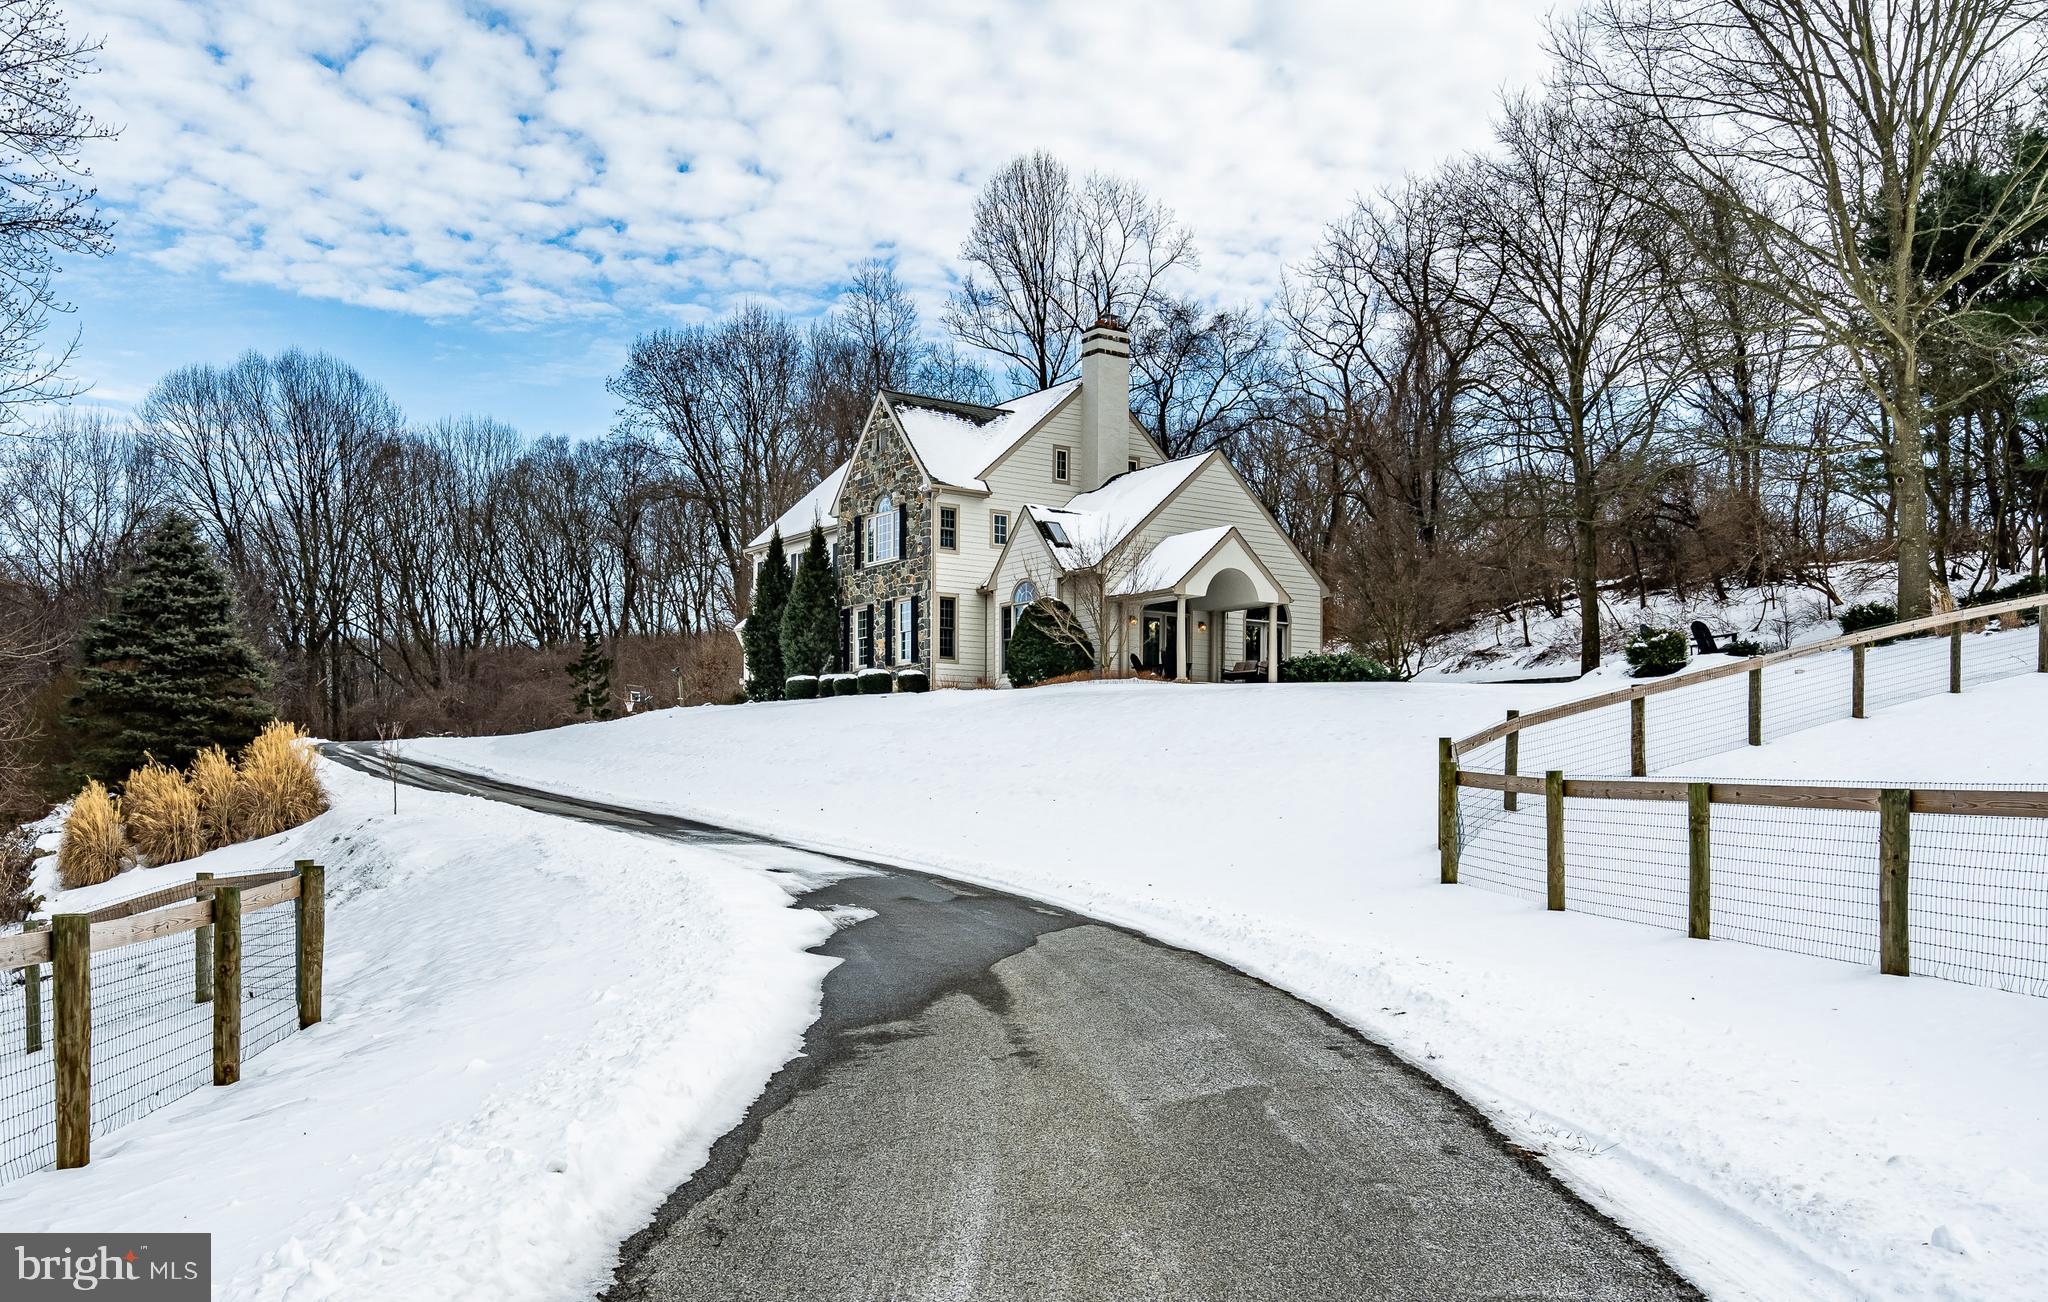 a view of a house with snow on the road